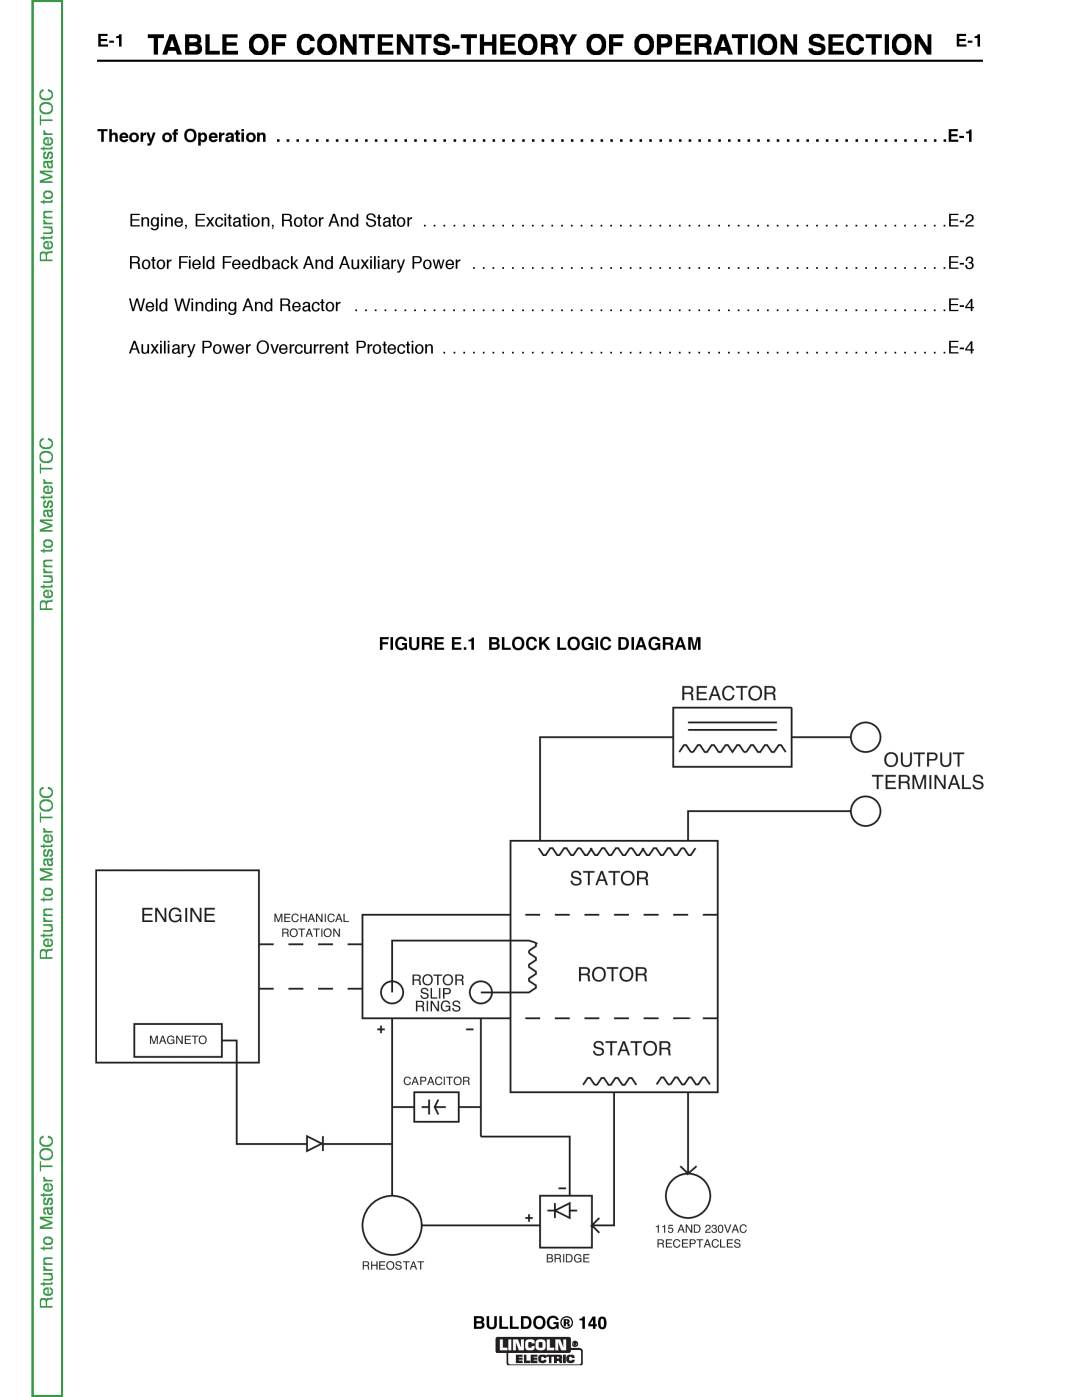 Lincoln Electric SVM208-A E-1 TABLE OF CONTENTS-THEORY OF OPERATION SECTION E-1, Engine, FIGURE E.1 BLOCK LOGIC DIAGRAM 